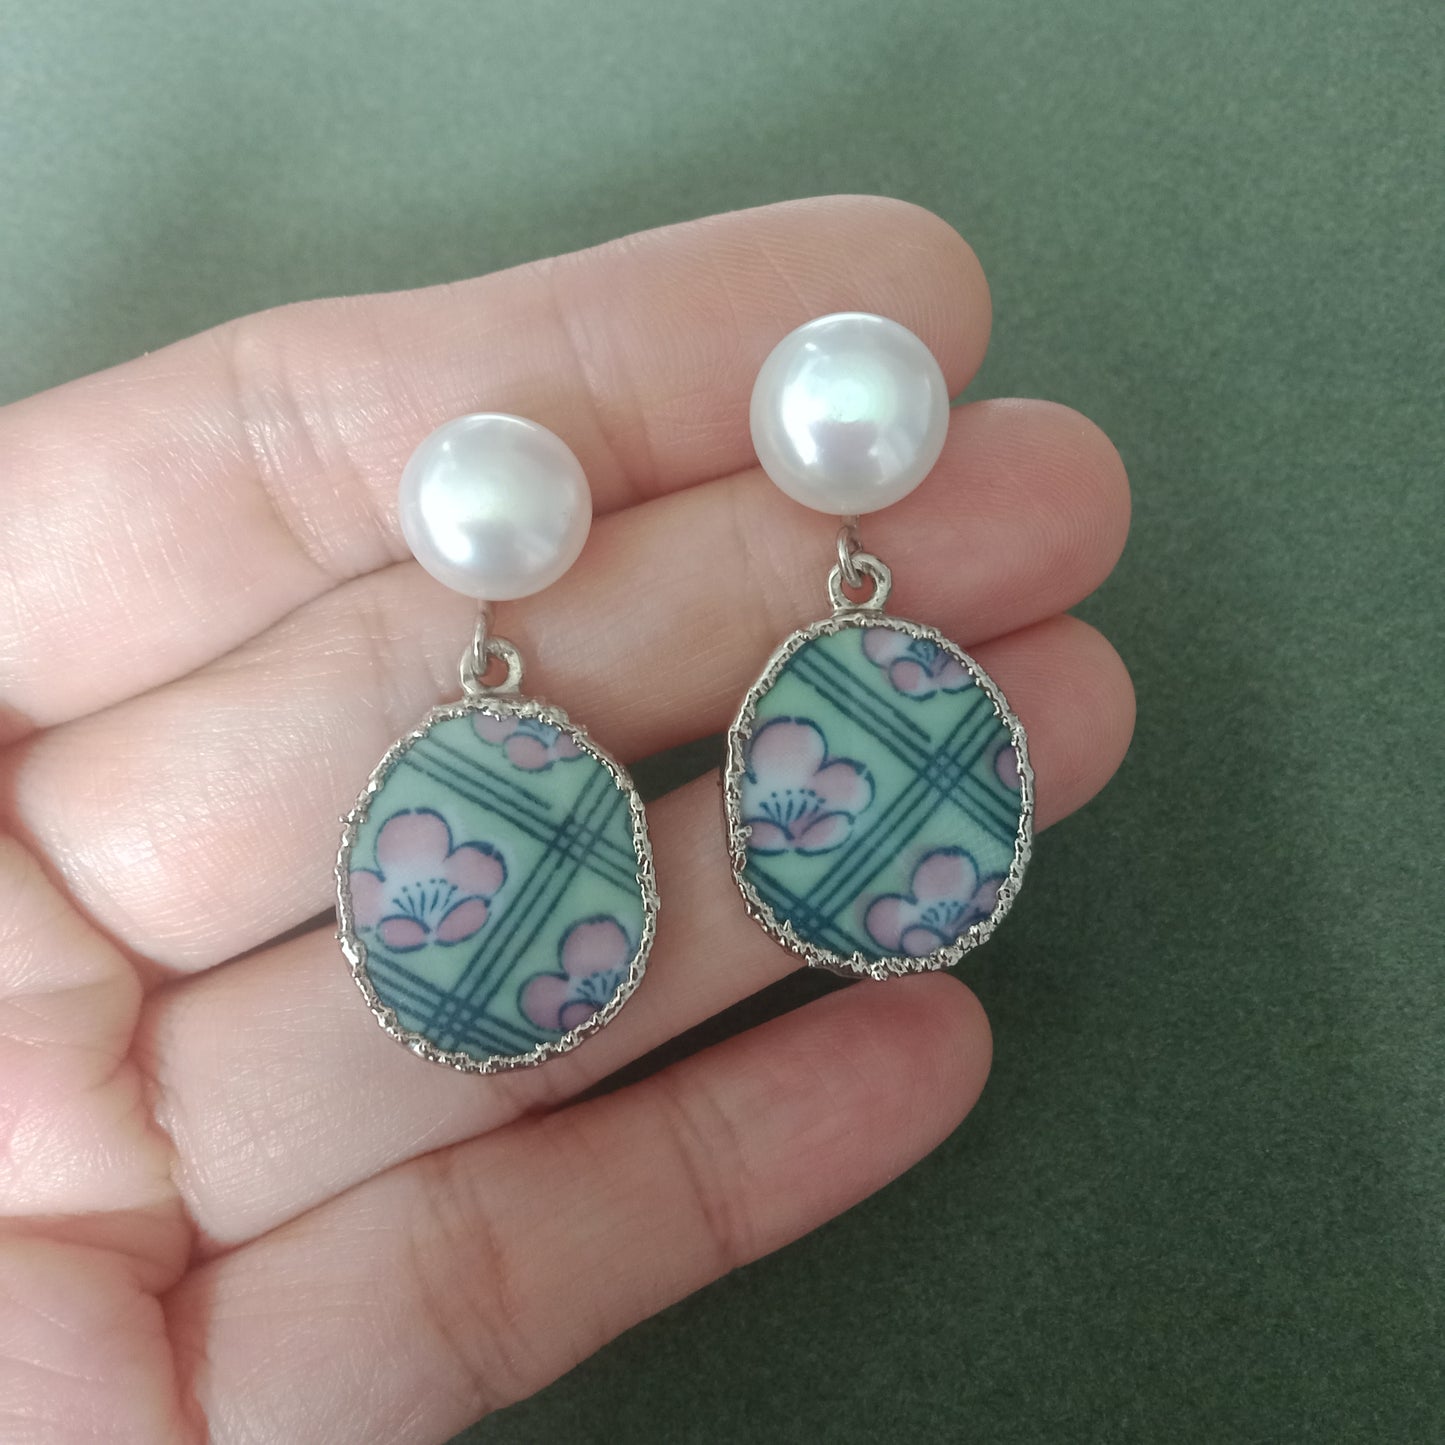 Small cherry blossom porcelain and FW pearl earrings